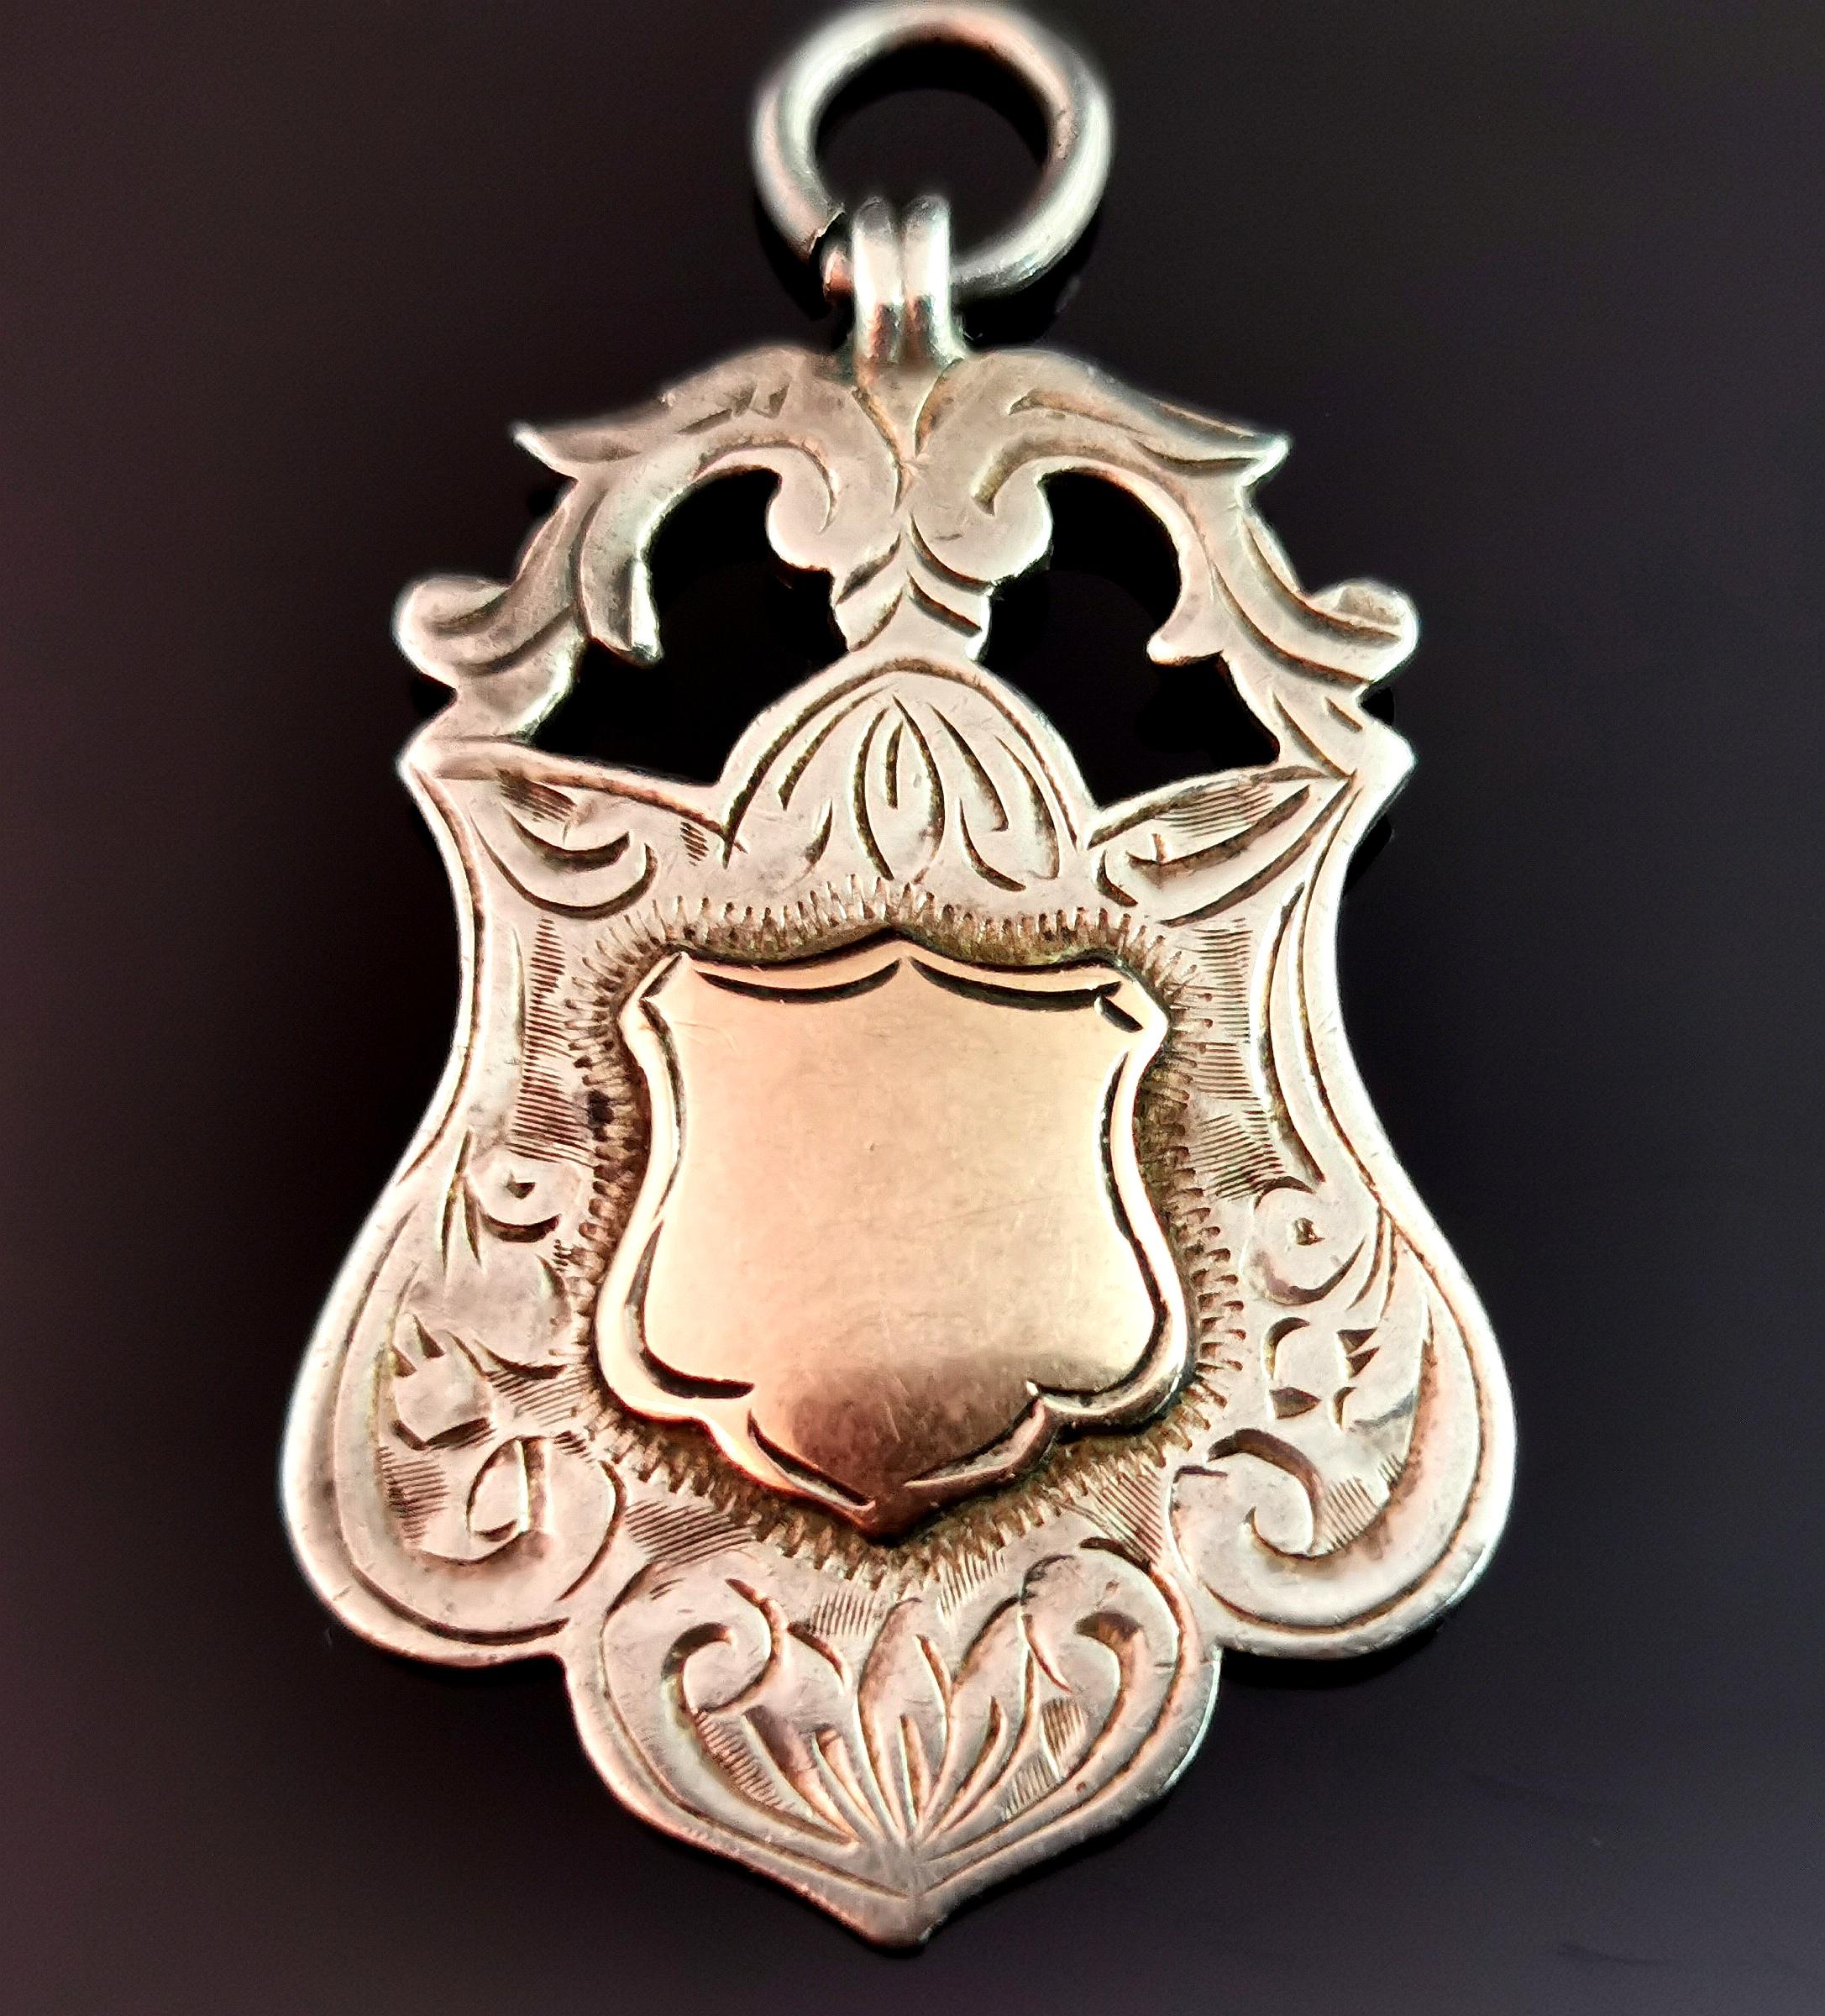 An attractive antique, Art Deco sterling silver and Rose gold shield fob.

A nice heavy fob with a decorative engraved shield design and a 9kt Rose gold cartouche to the centre, this has not been monogrammed or engraved so could be personalised if